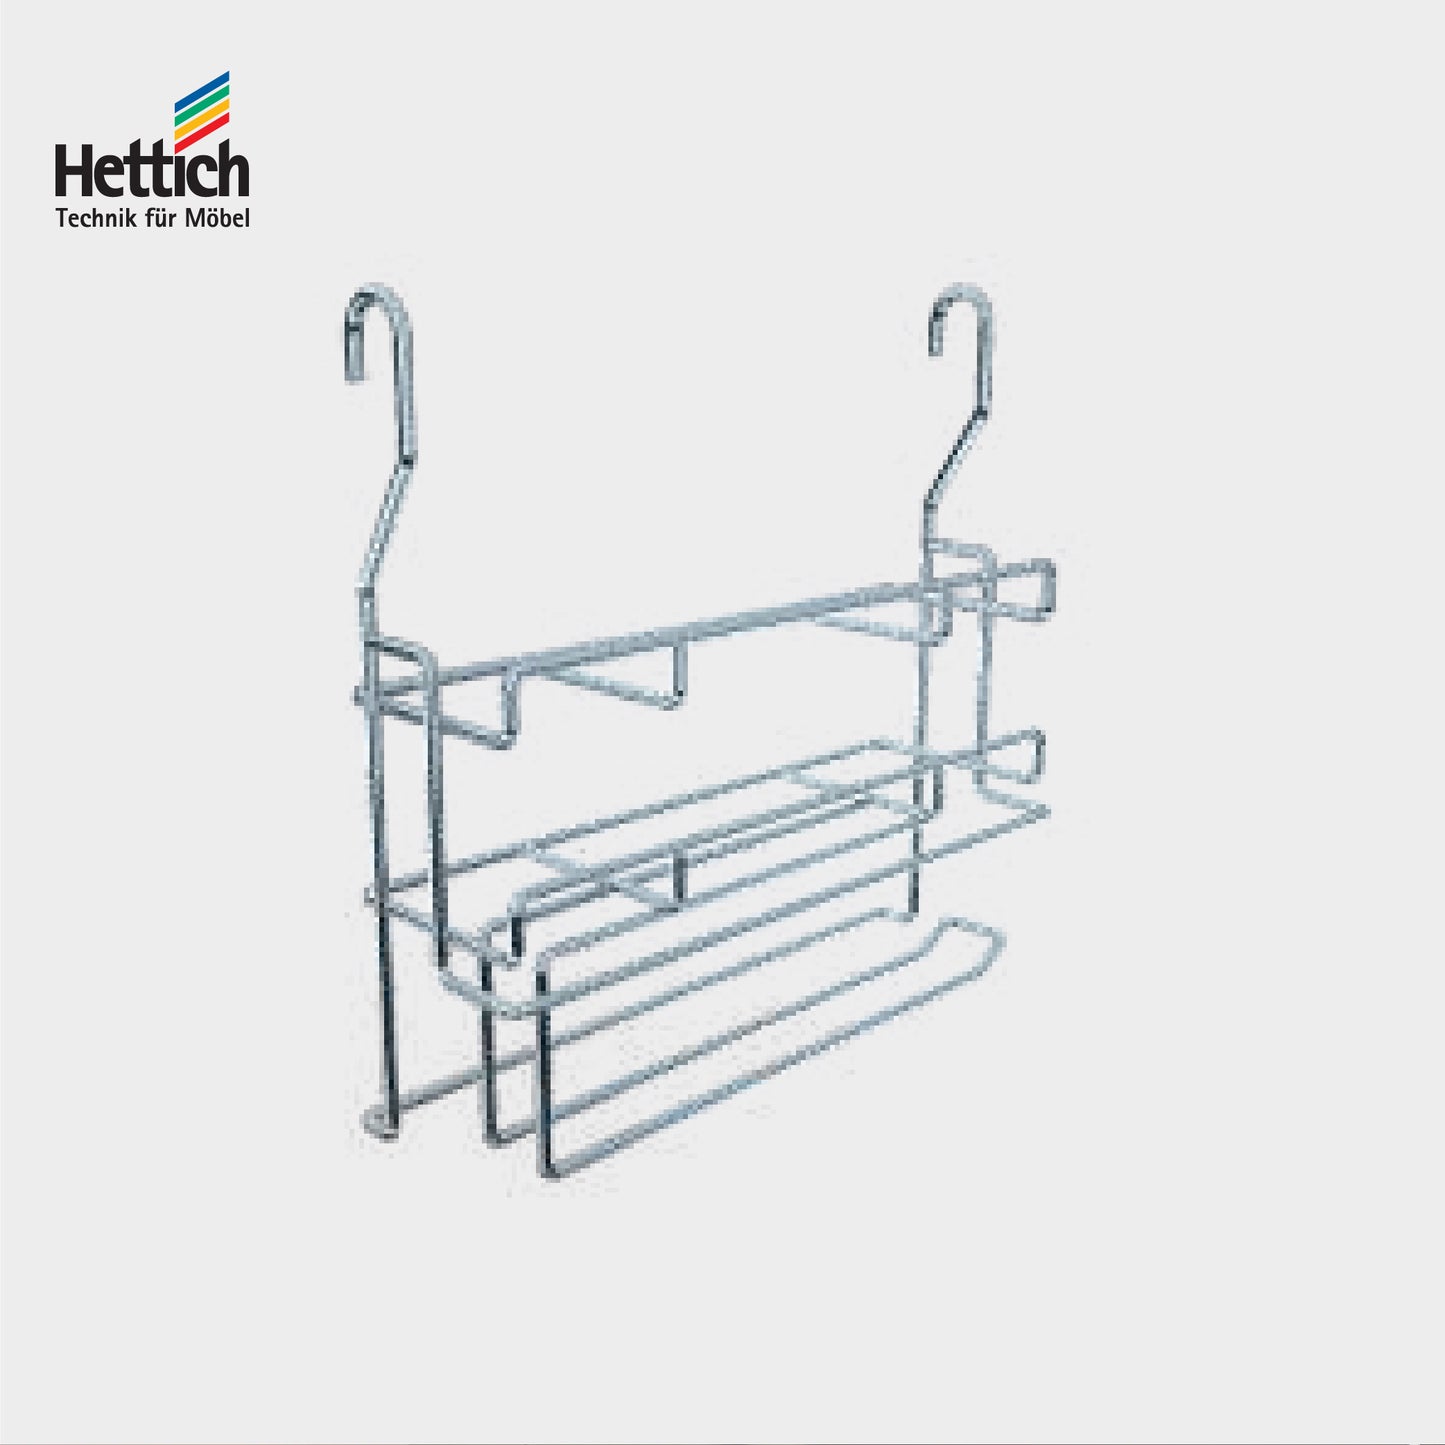 Hettich Cargo Midway Kitchen Roll Holder, Size 333x100x325mm, Chrome Plated Finish - HT926998700